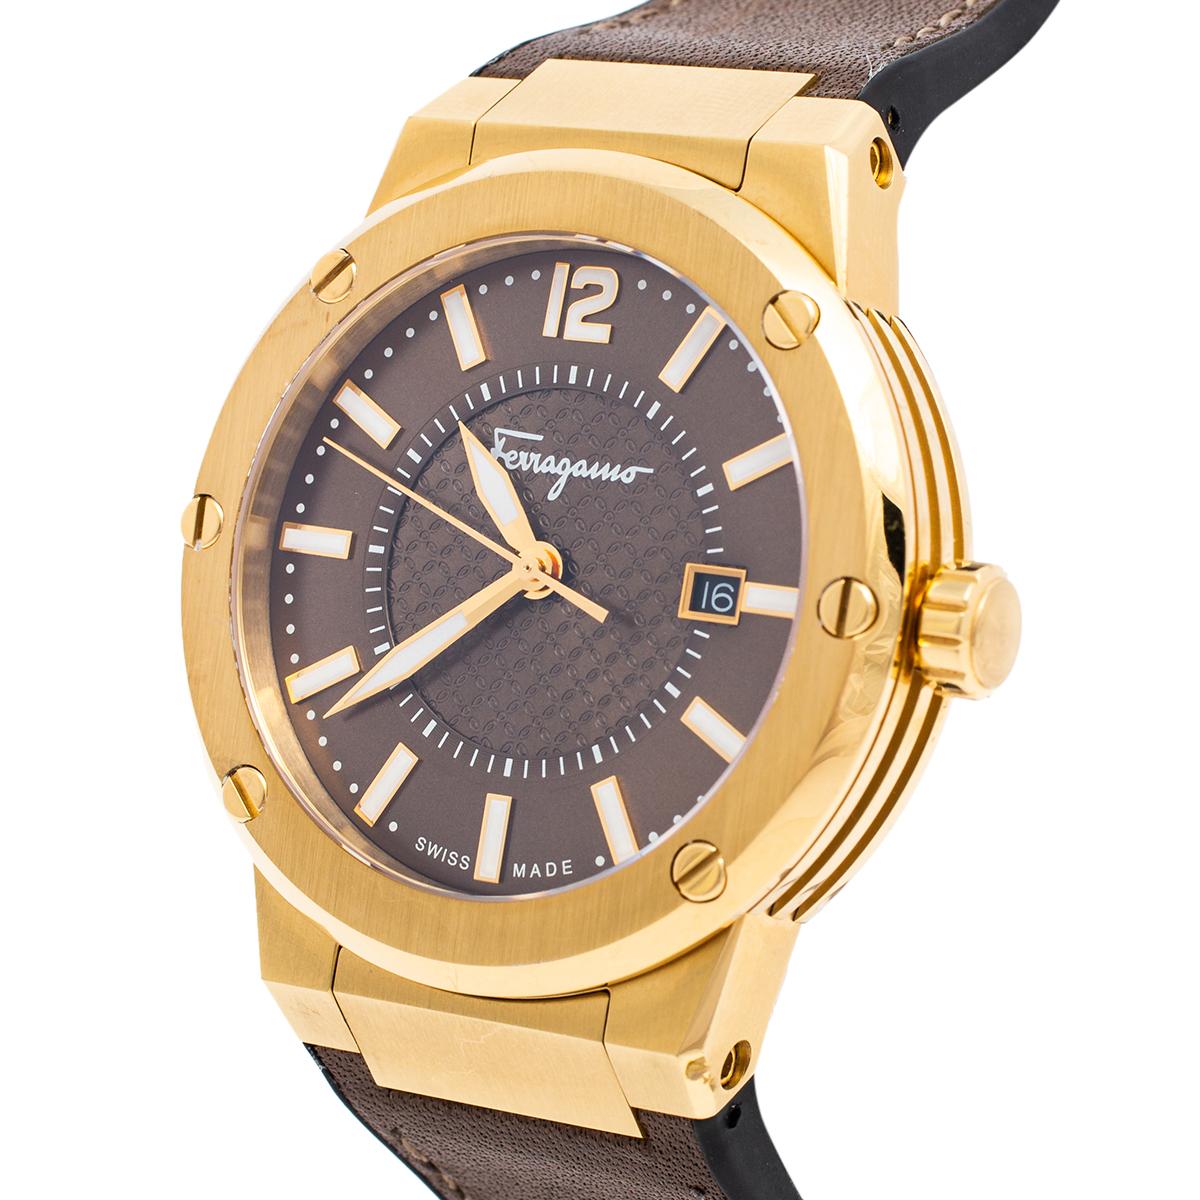 Let this Salvatore Ferragamo watch keep you on time and add to your everyday style. The gold stainless steel case comes with a brown dial featuring elegant markers, three hands, and a date window at the 3 o'clock position. It is complete with a